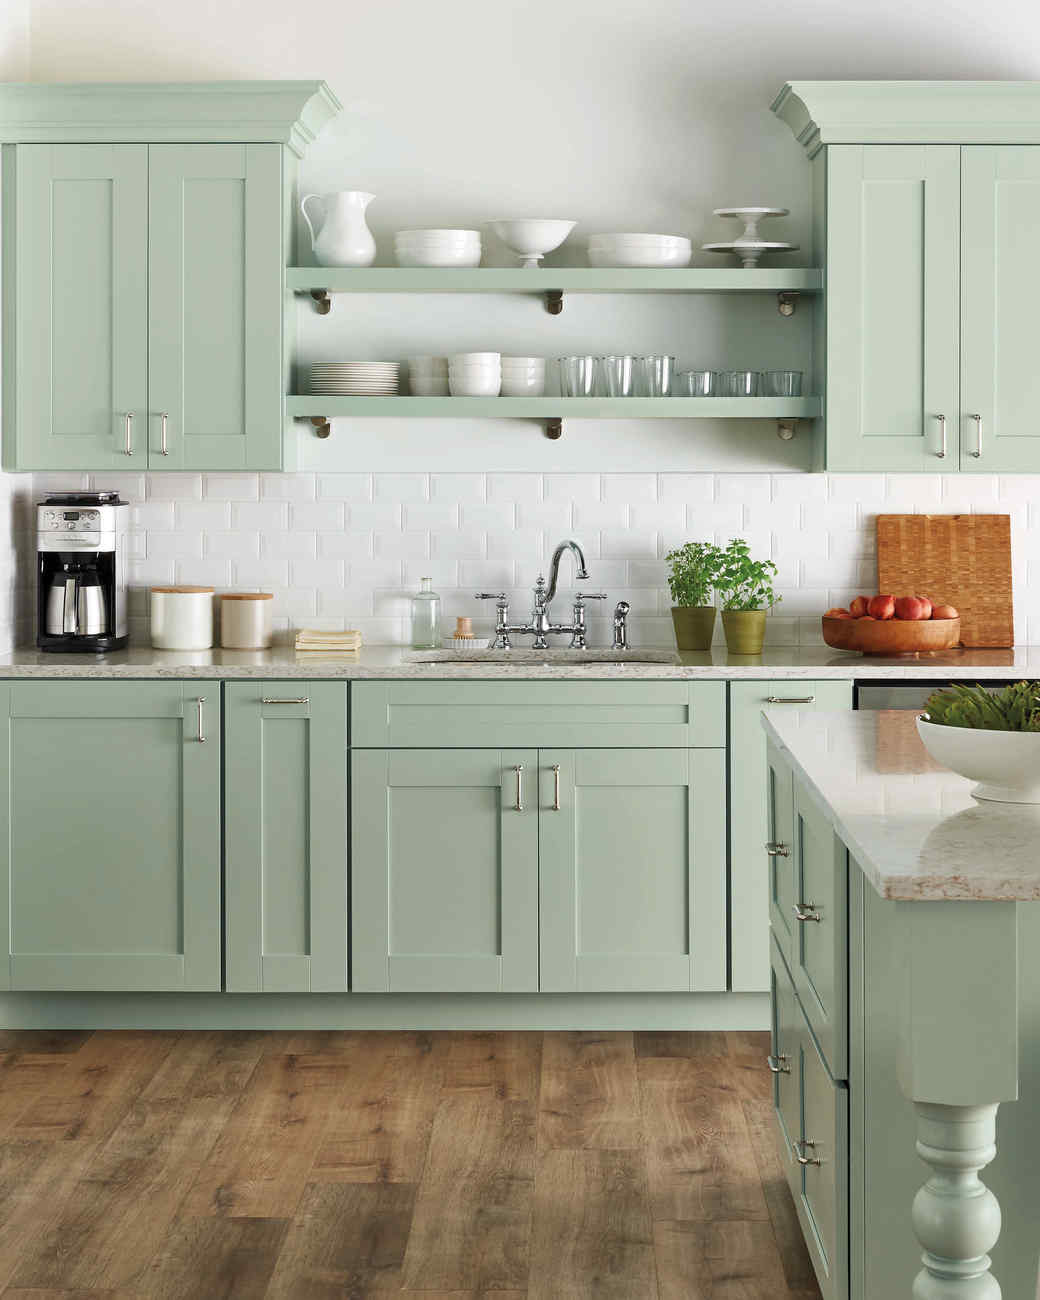 Homedepot Kitchen Cabinets
 Select Your Kitchen Style